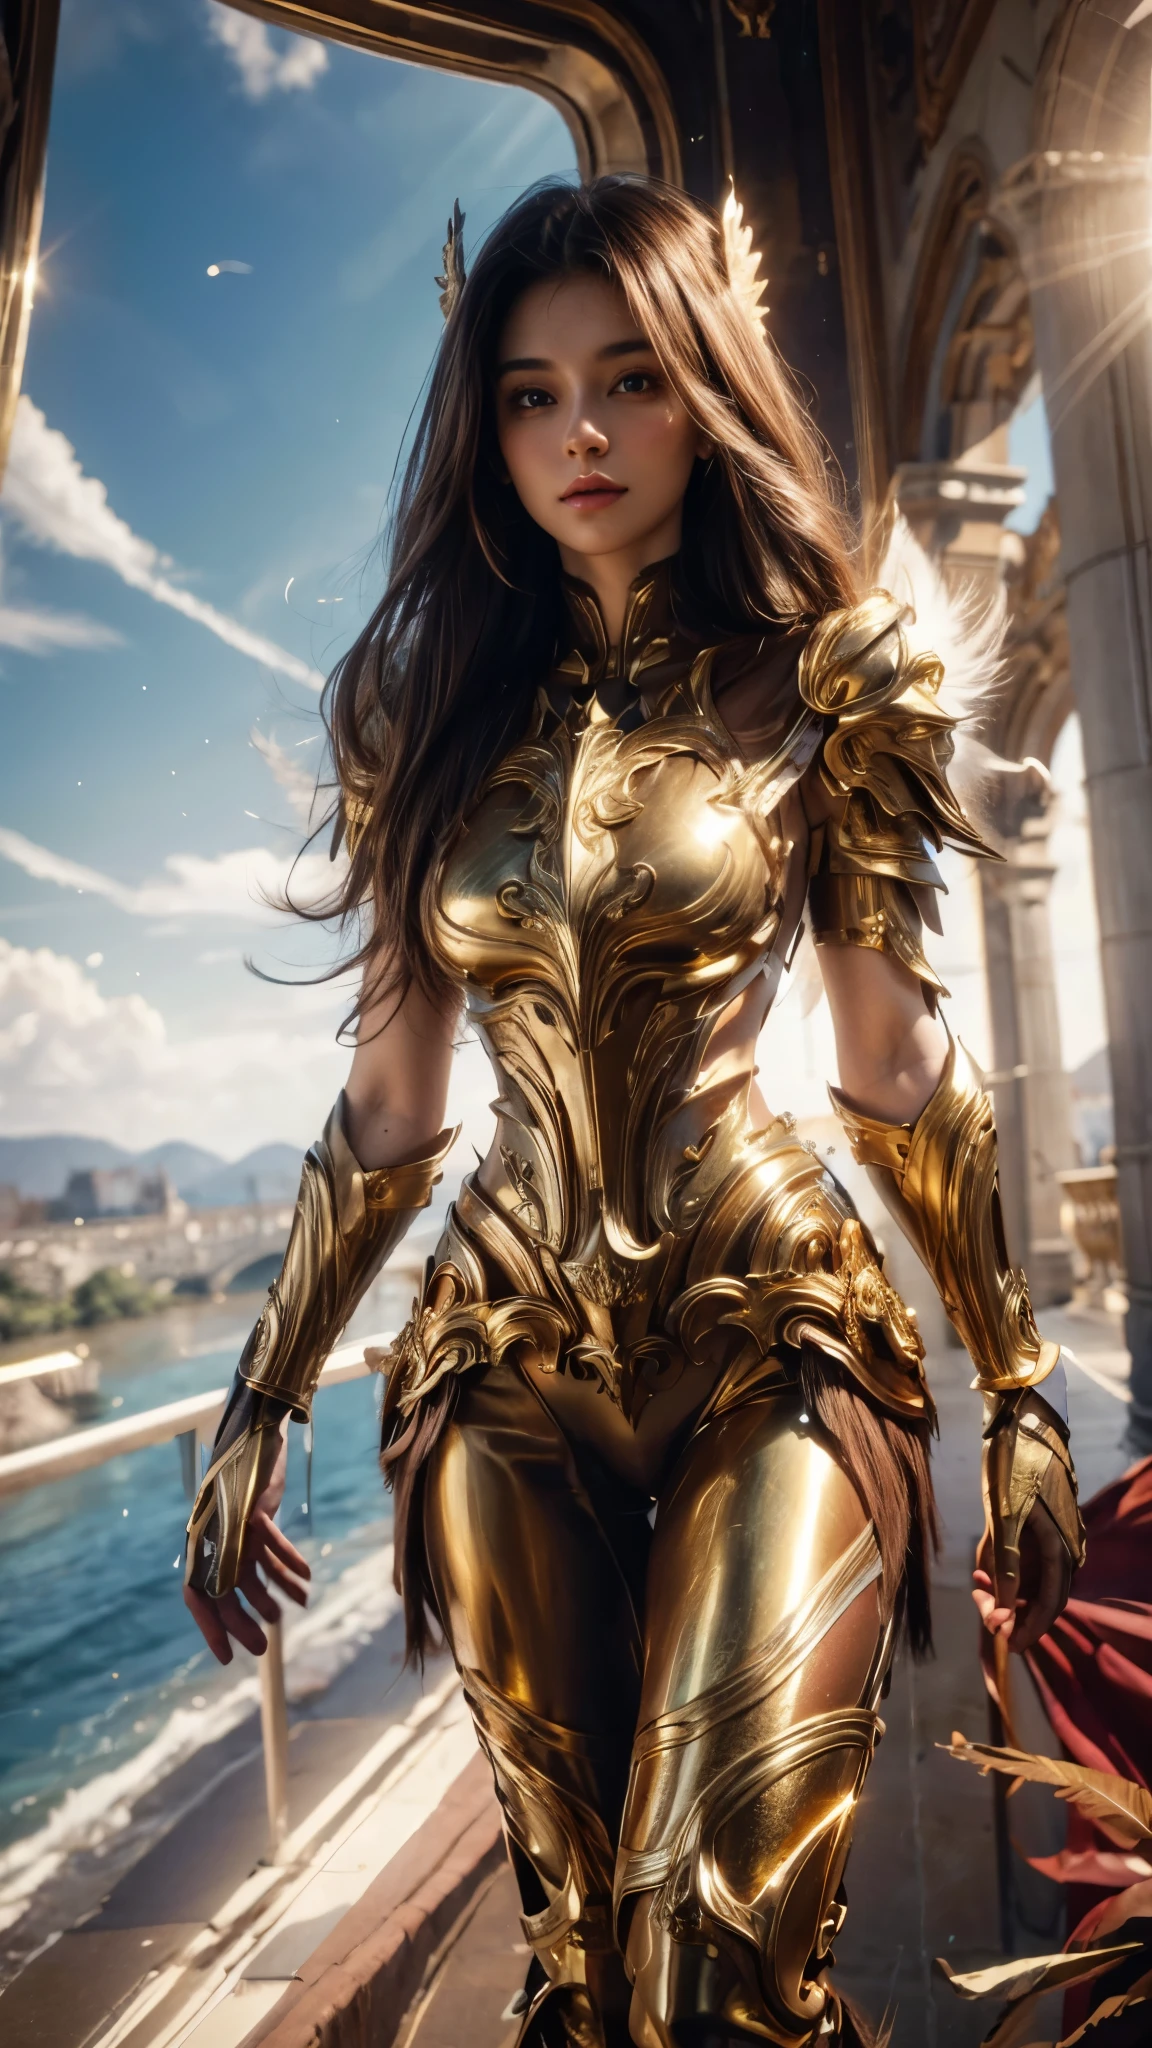 WINGED WOMAN, SAINT WOMAN, HUGE LONG HAIR, BROWN HAIR, HUGE BROWN FEATHERS, GOLD BODY ARMOUR, LONG BLUE BODYSUIT, PALE SKIN, BLUE EYES, LIGHTING EYES, ROSY CHEEKS, MENTAL FORAMEN, ATHLETIC BODY, LUMINOUS BODY AURA, MUSCLES, LIGHTING AURA, GOLD BRACELETS, GOLD GAUNTLETS, BACKLIGHTS, SUN, RIVER, SAINT WOMAN, SIDE BODY VIEW, ANGEL FROM HEAVEN